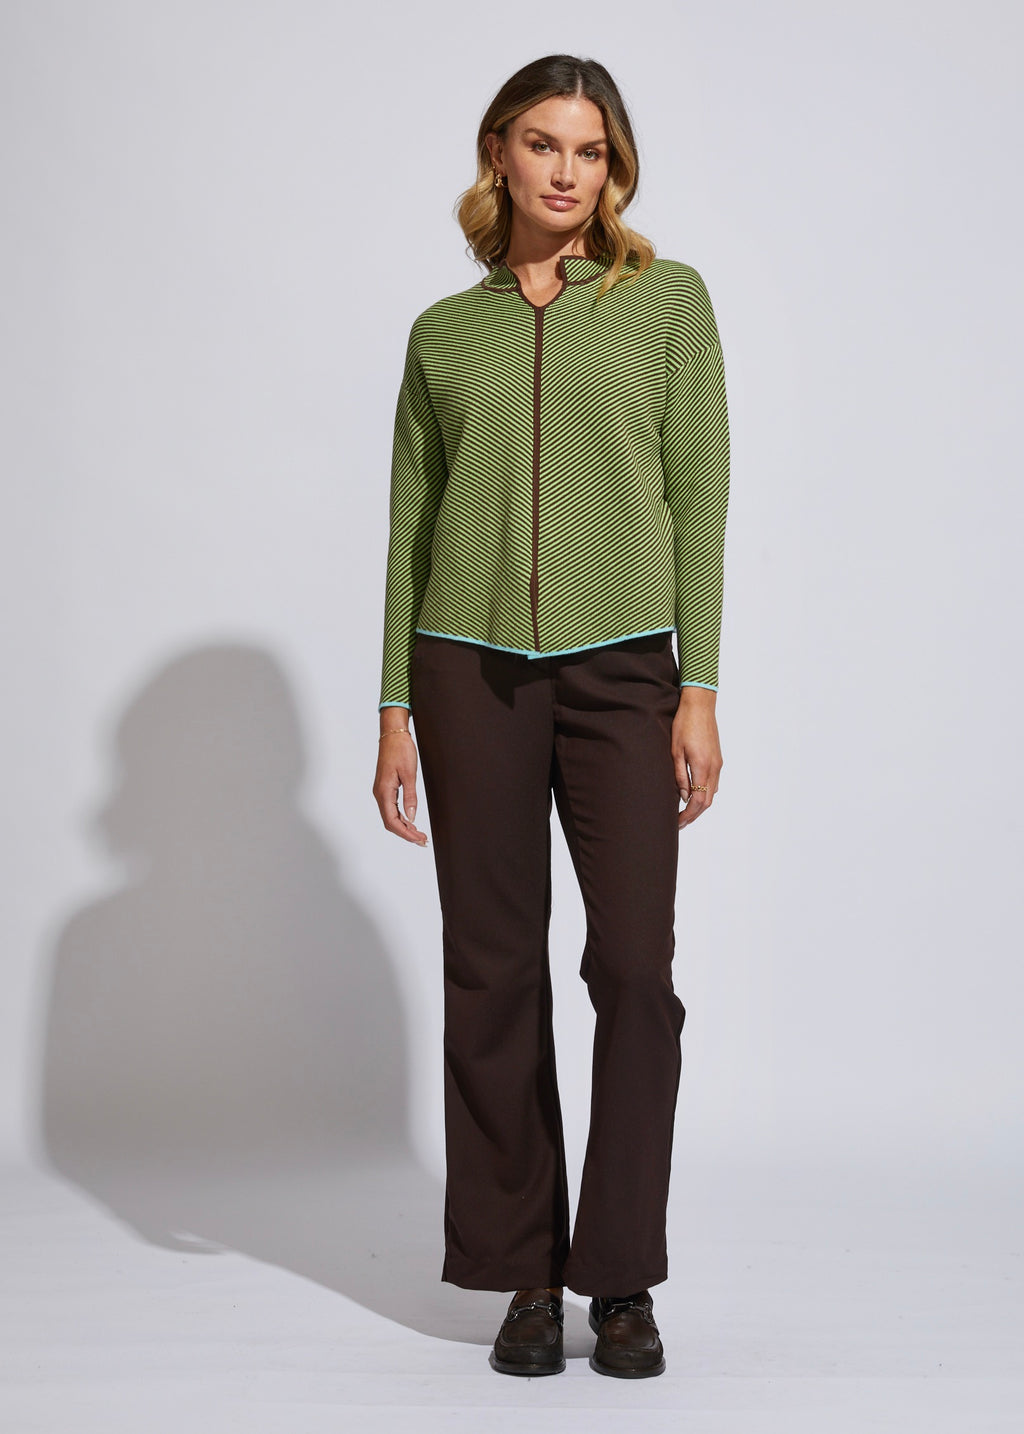 the neru collar jumper by ld and co is a knitted sweater in a chocolate brown and green diagnol knit pattern